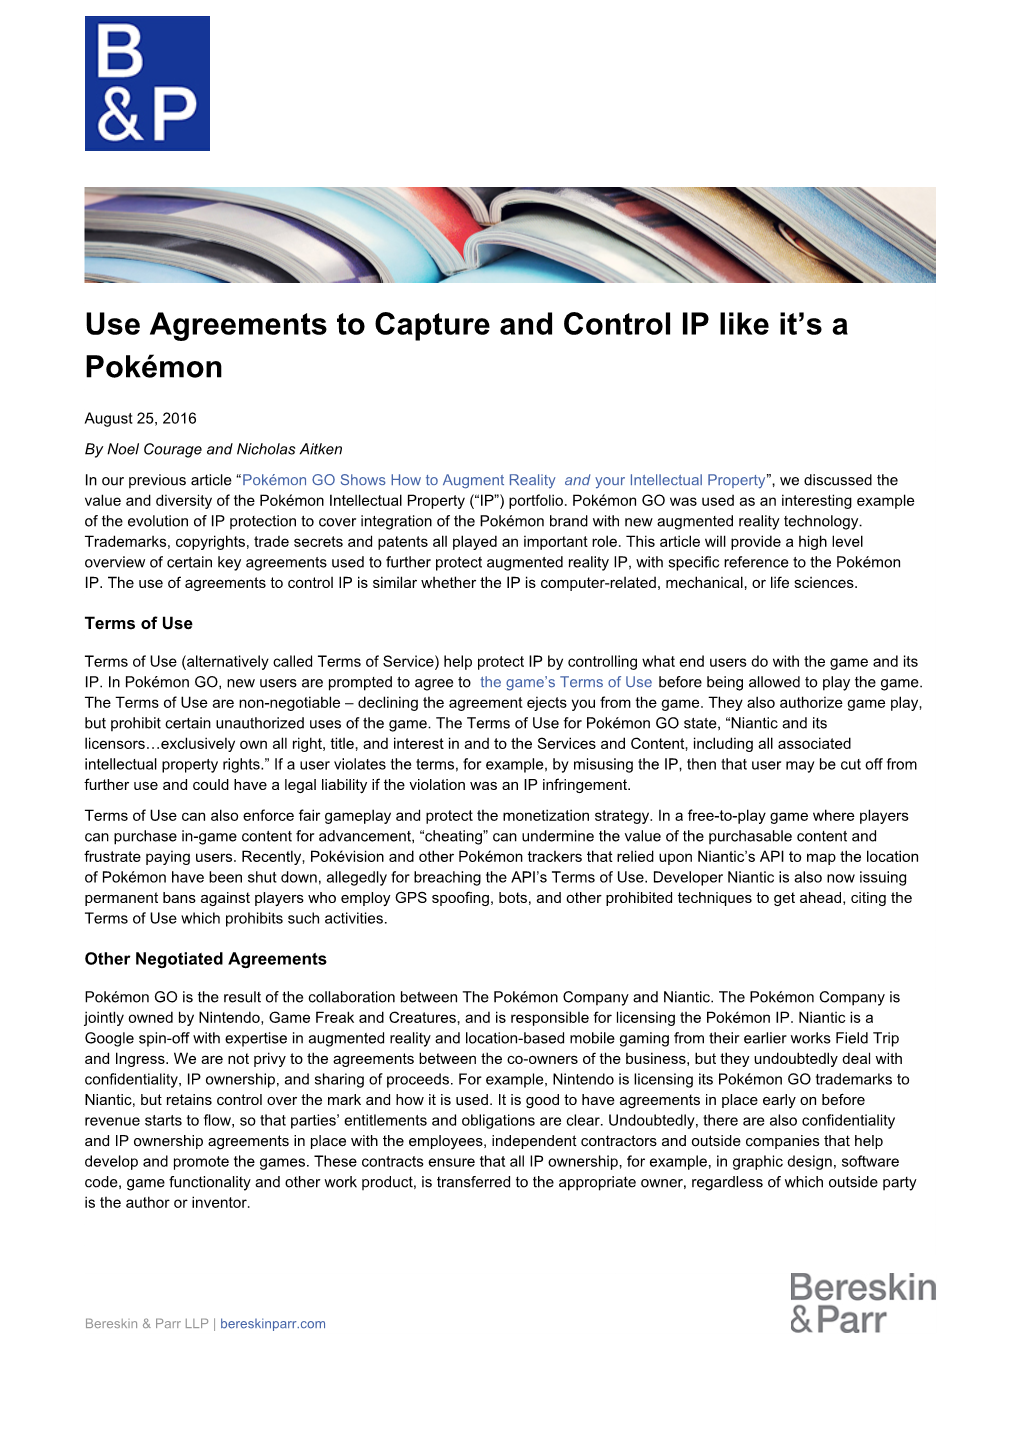 Use Agreements to Capture and Control IP Like It's a Pokémon